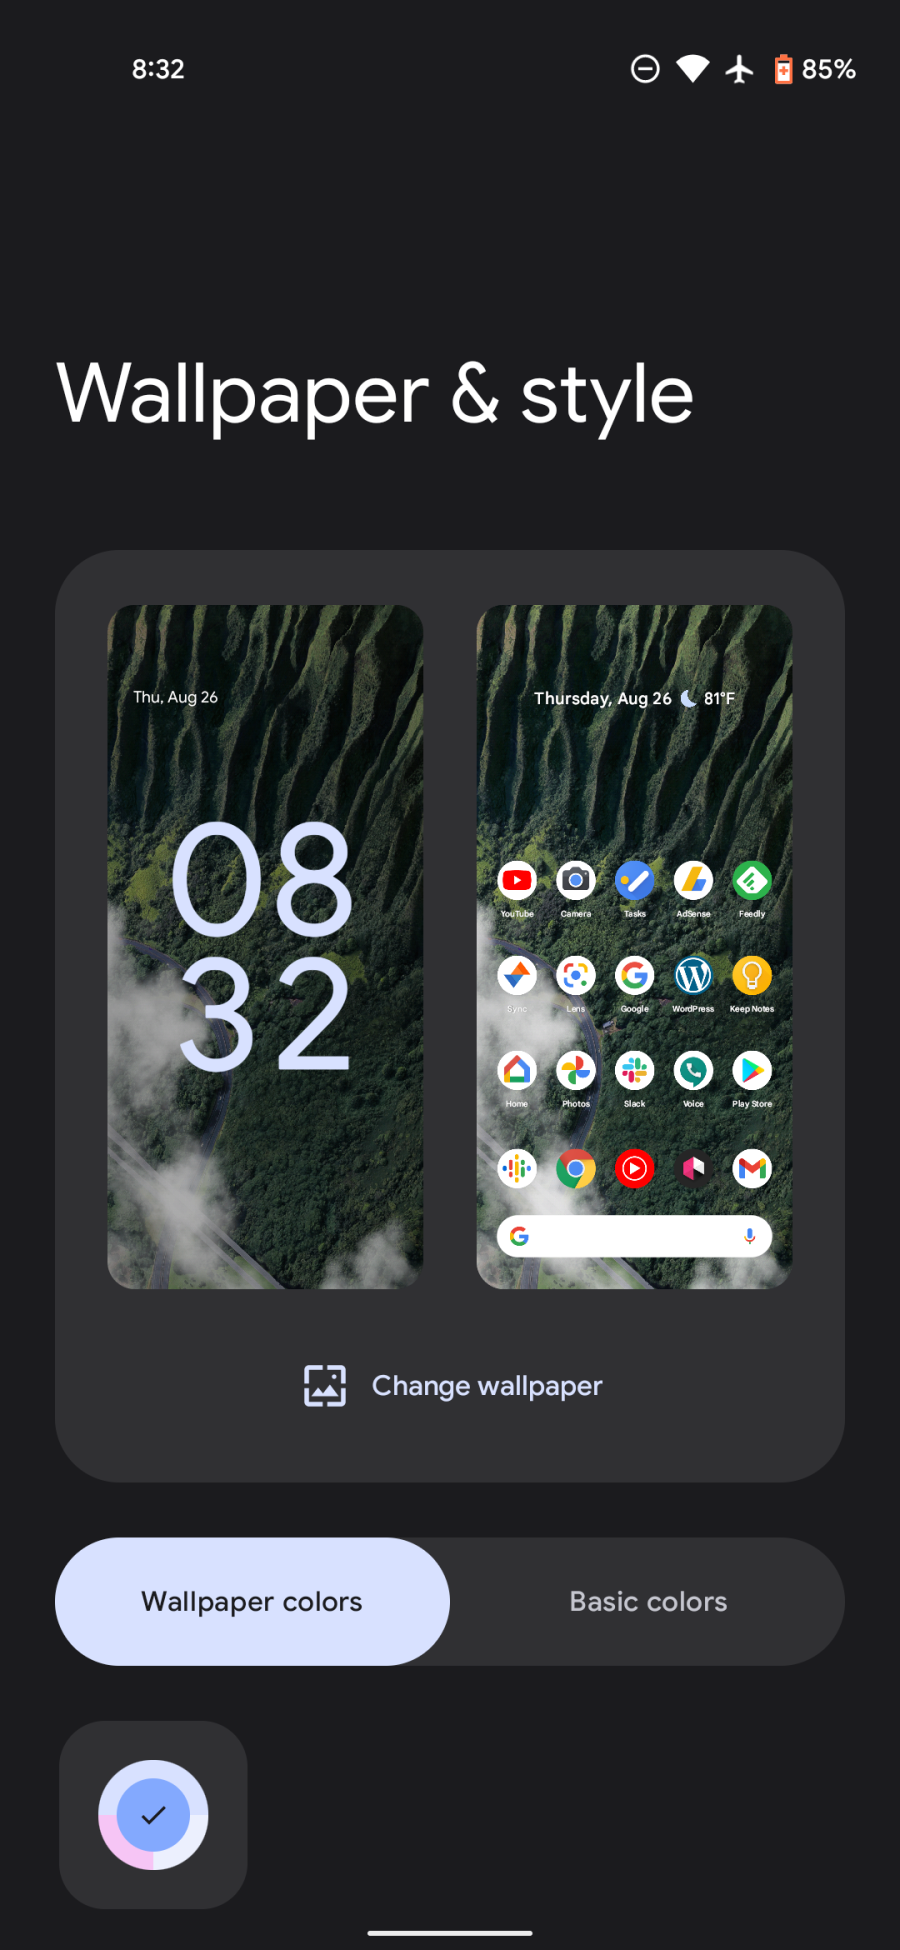 Pixel Live Wallpaper 1.6 turns on Android 12 Dynamic Color - 9to5Google